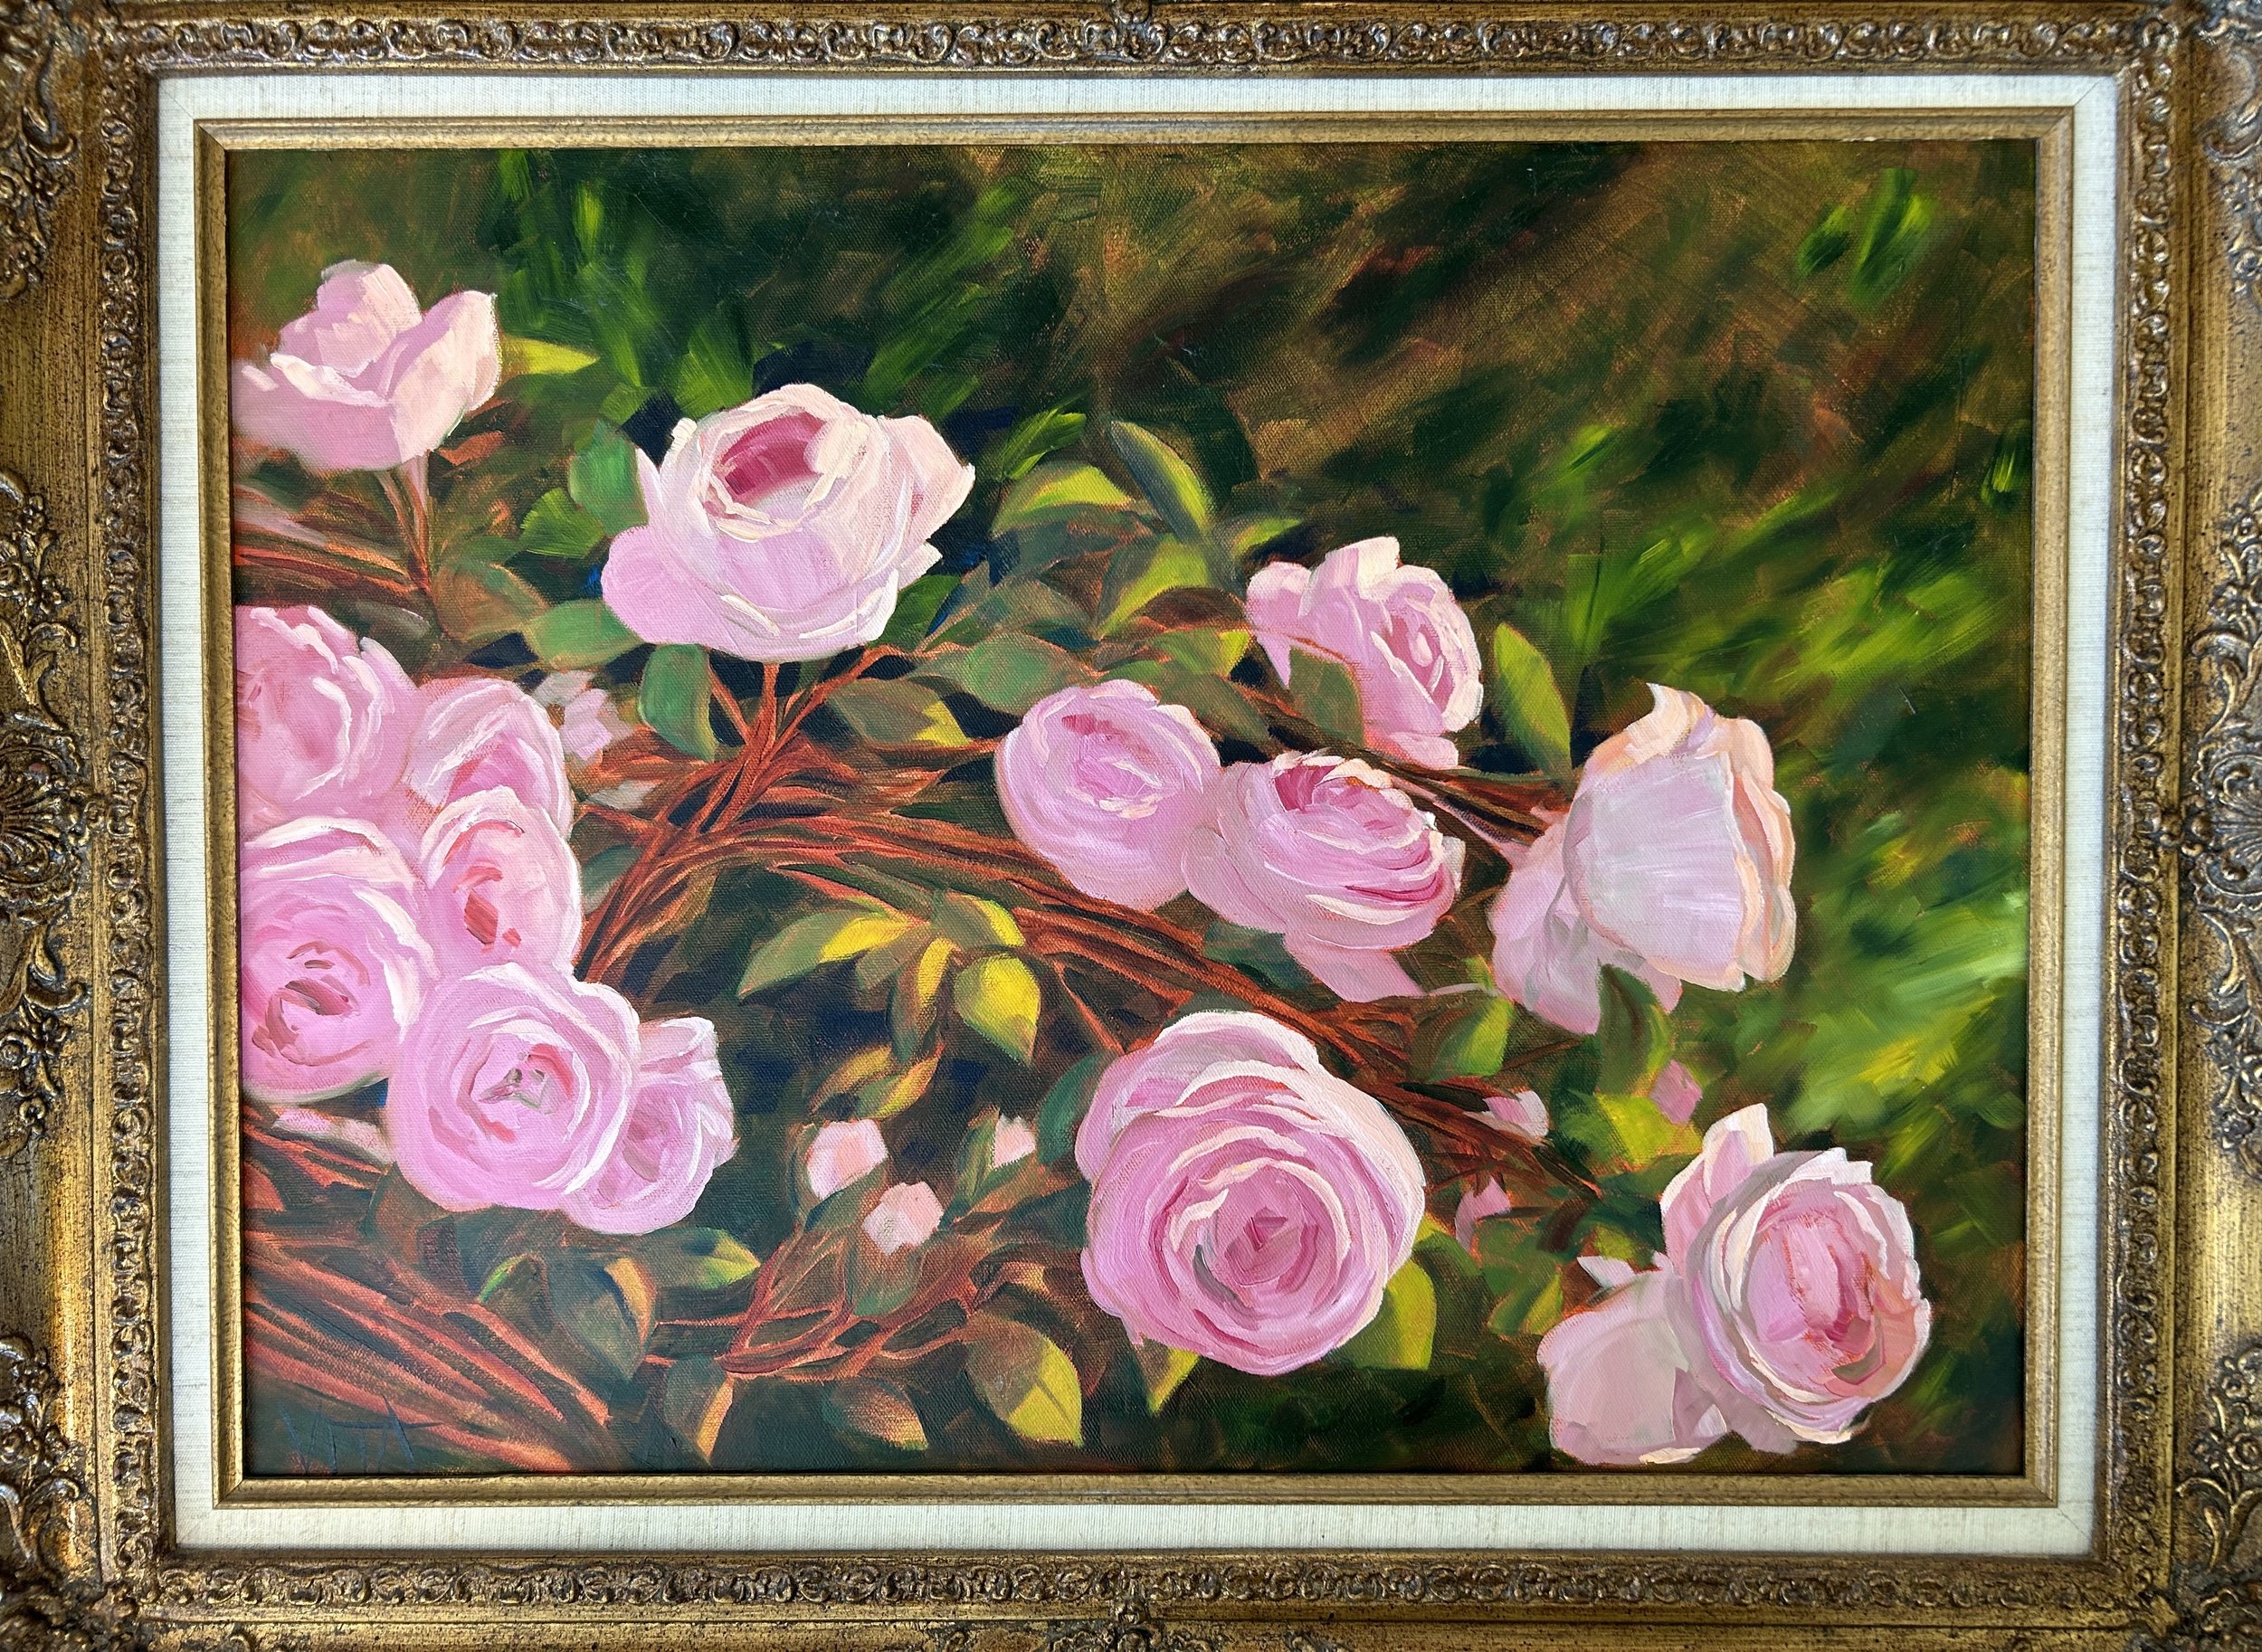 SOLD, The Sweetest Flowers, Oil on Canvas, Copyright 2019 Hirschten